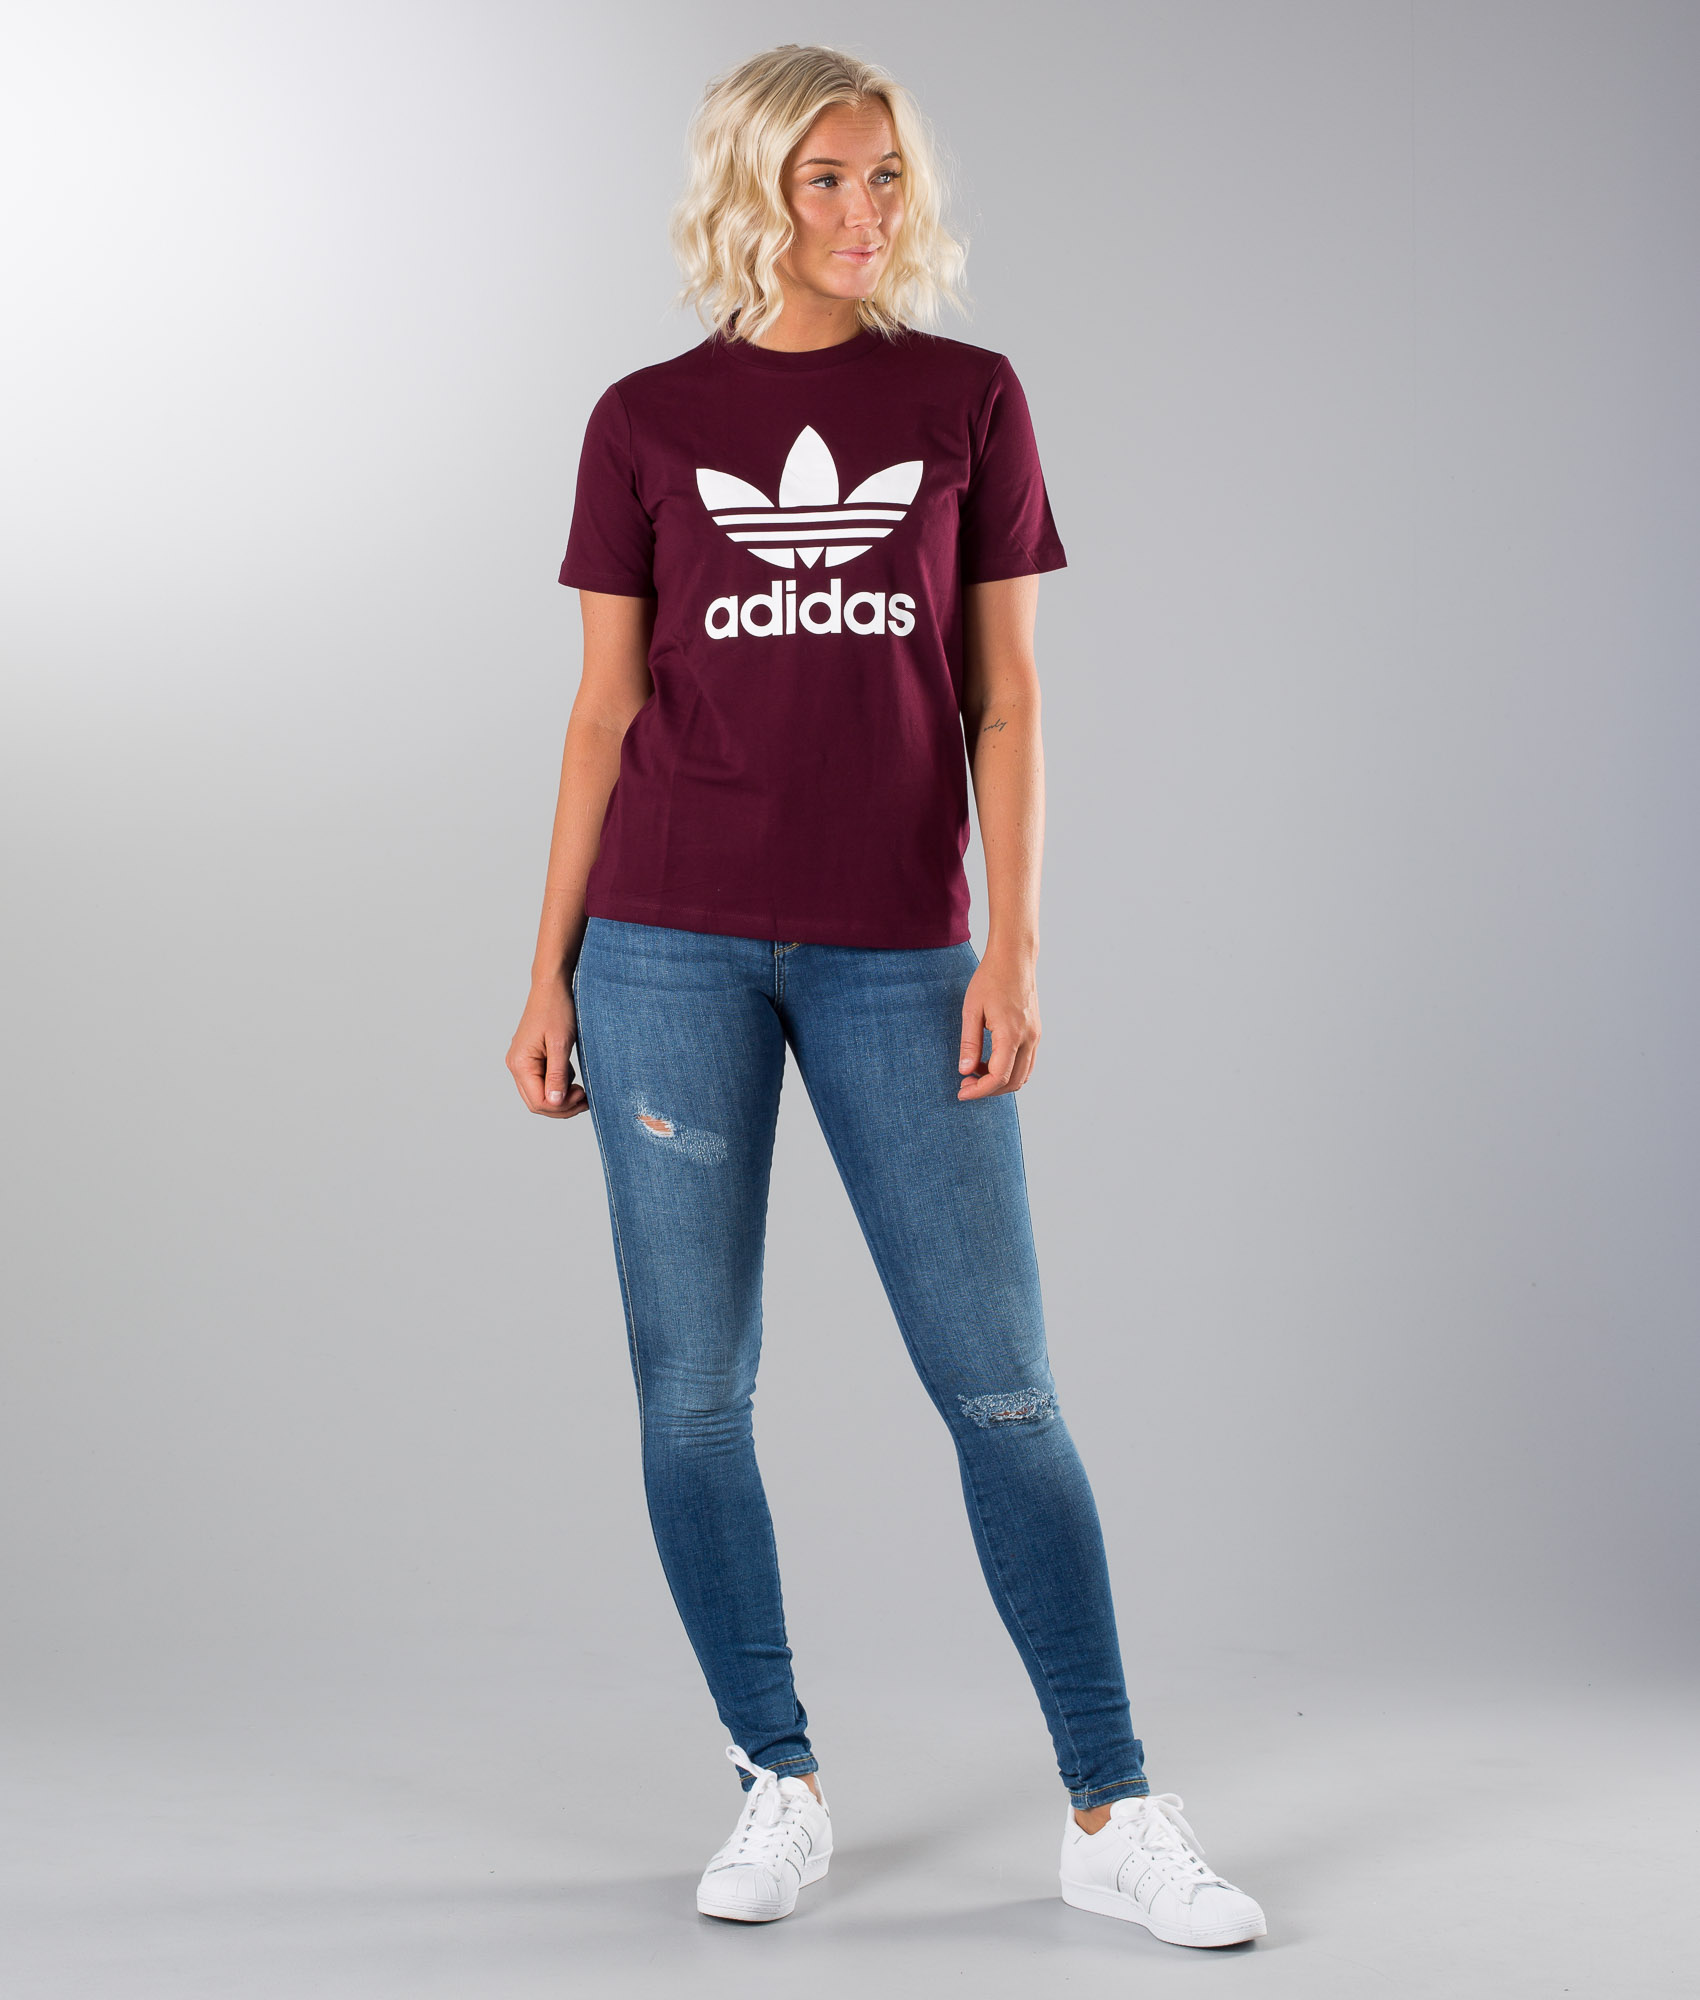 adidas t shirt with jeans